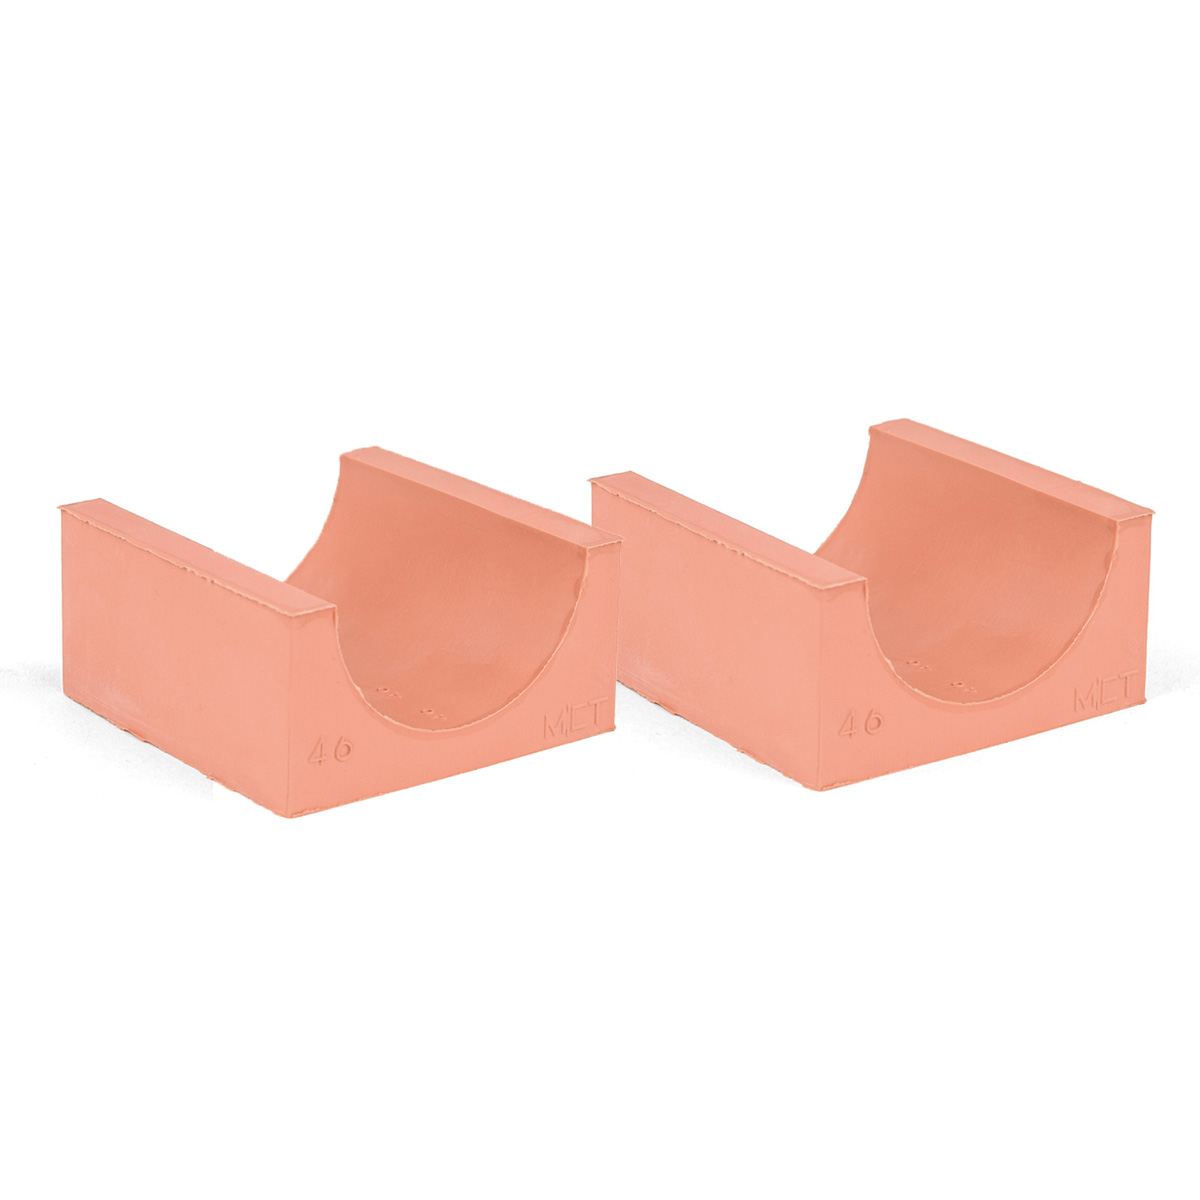 60-46*2 Set of 2 half insert block lycron, 60-46 for cable/pipe diam. 45.5-47.5mm